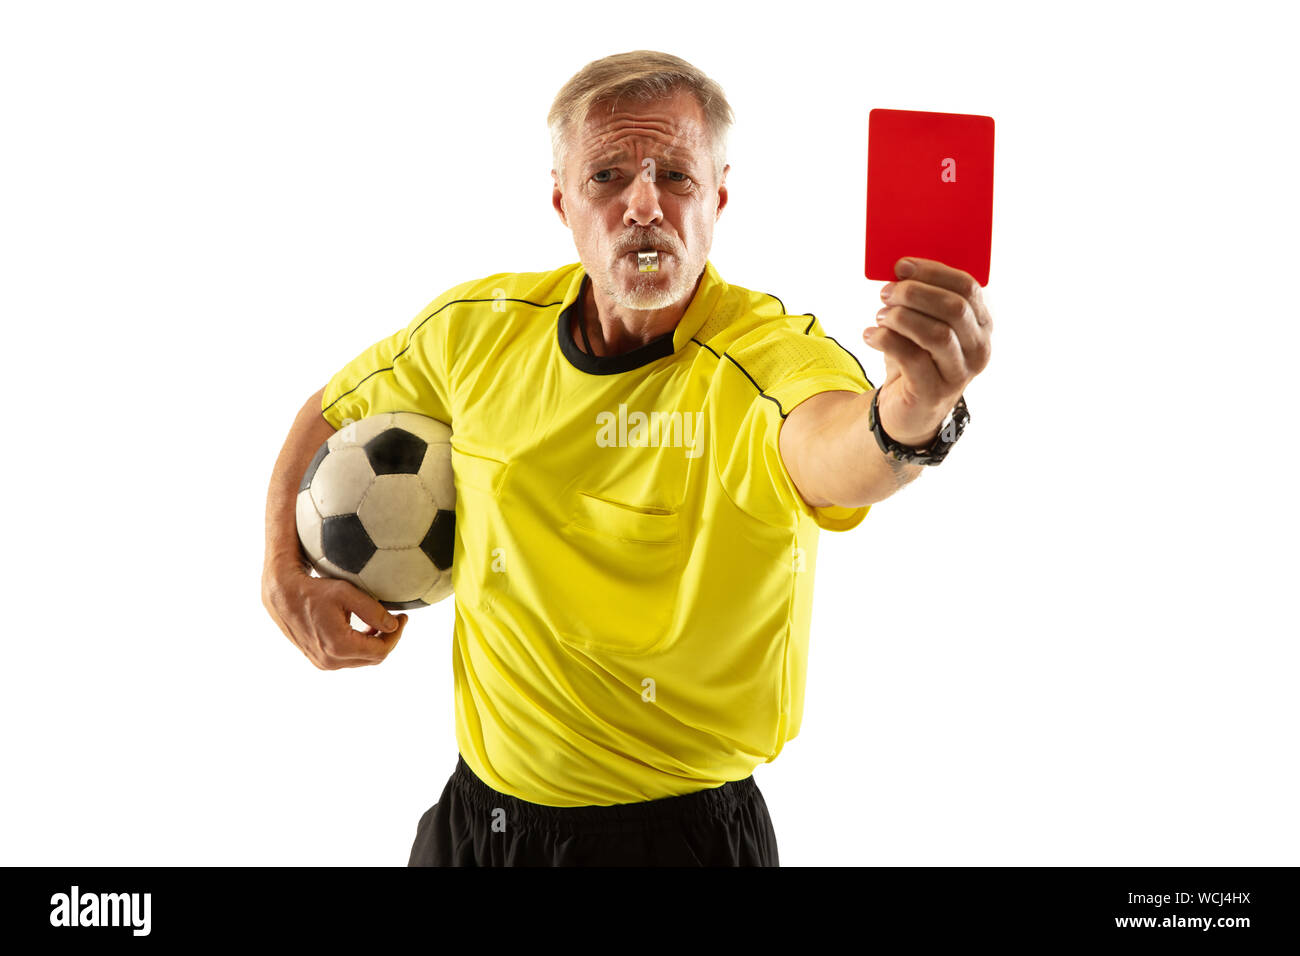 referee holding ball and showing a red card to a football or soccer player while gaming on white studio background concept of sport rules violation controversial issues obstacles overcoming WCJ4HX